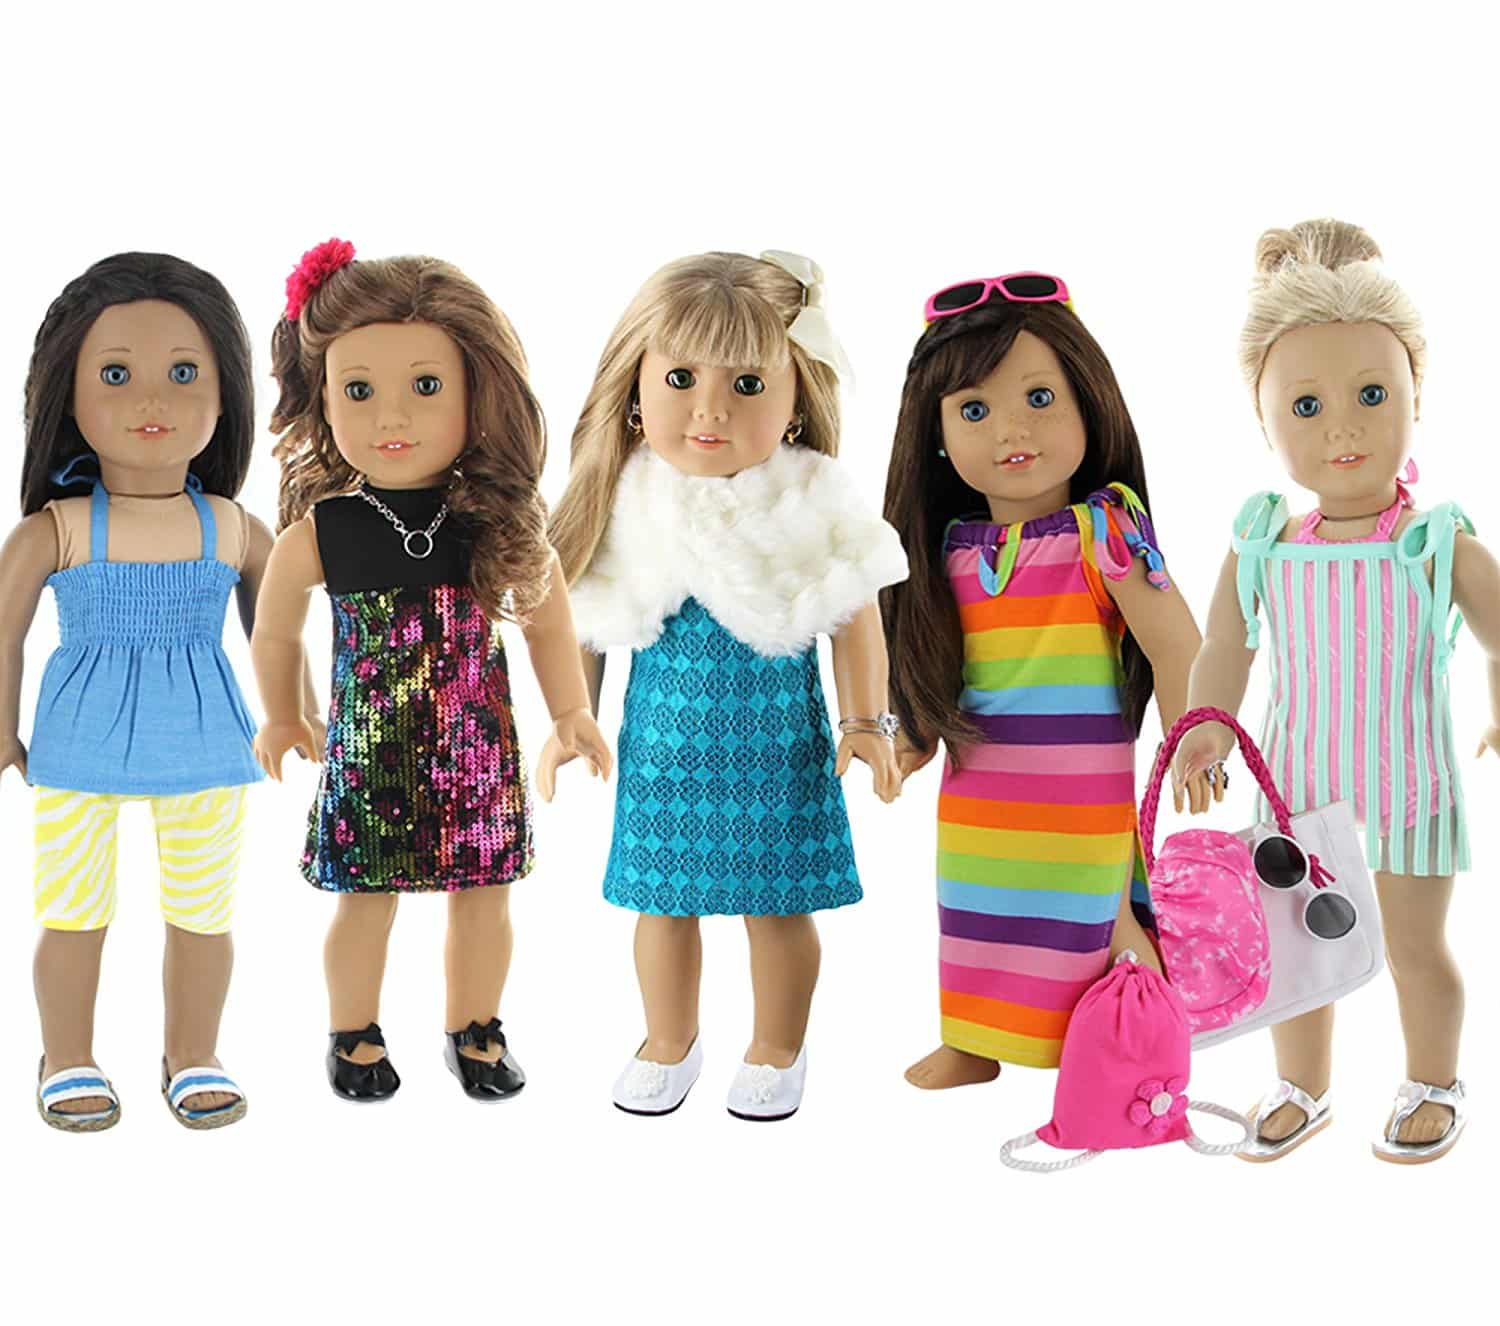 LIGHTNING DEAL ALERT! 28 Piece Holiday Lot Fits 18-Inch American Girl Doll Clothes – 38% off!